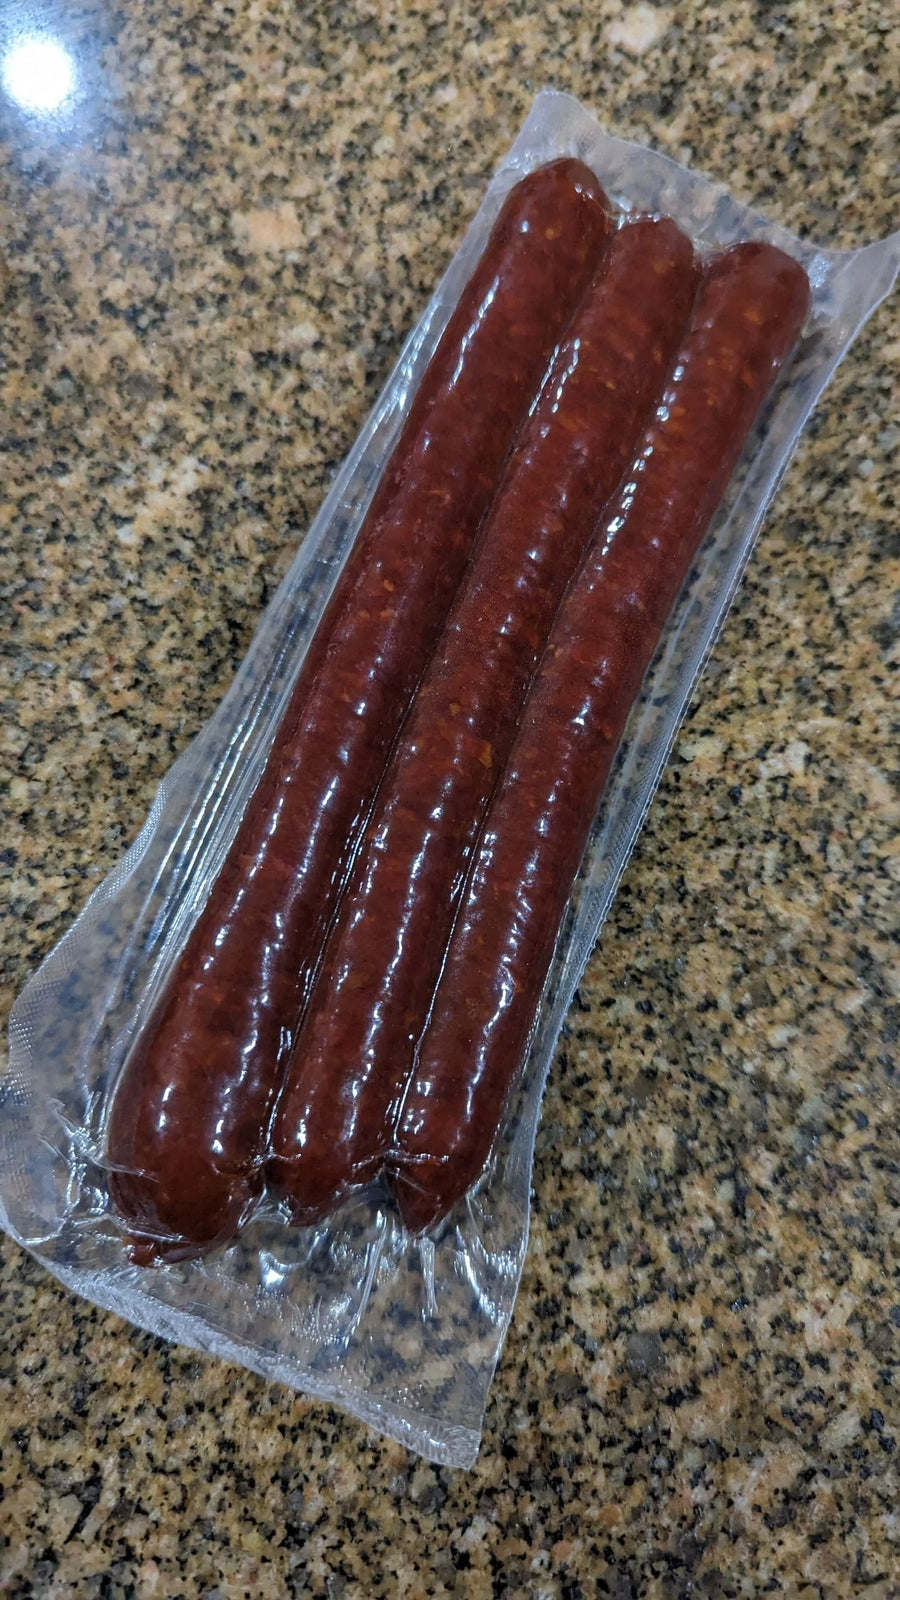 Red Bear Provisions Holy Cow! Beef Salami Dry Sticks - USA